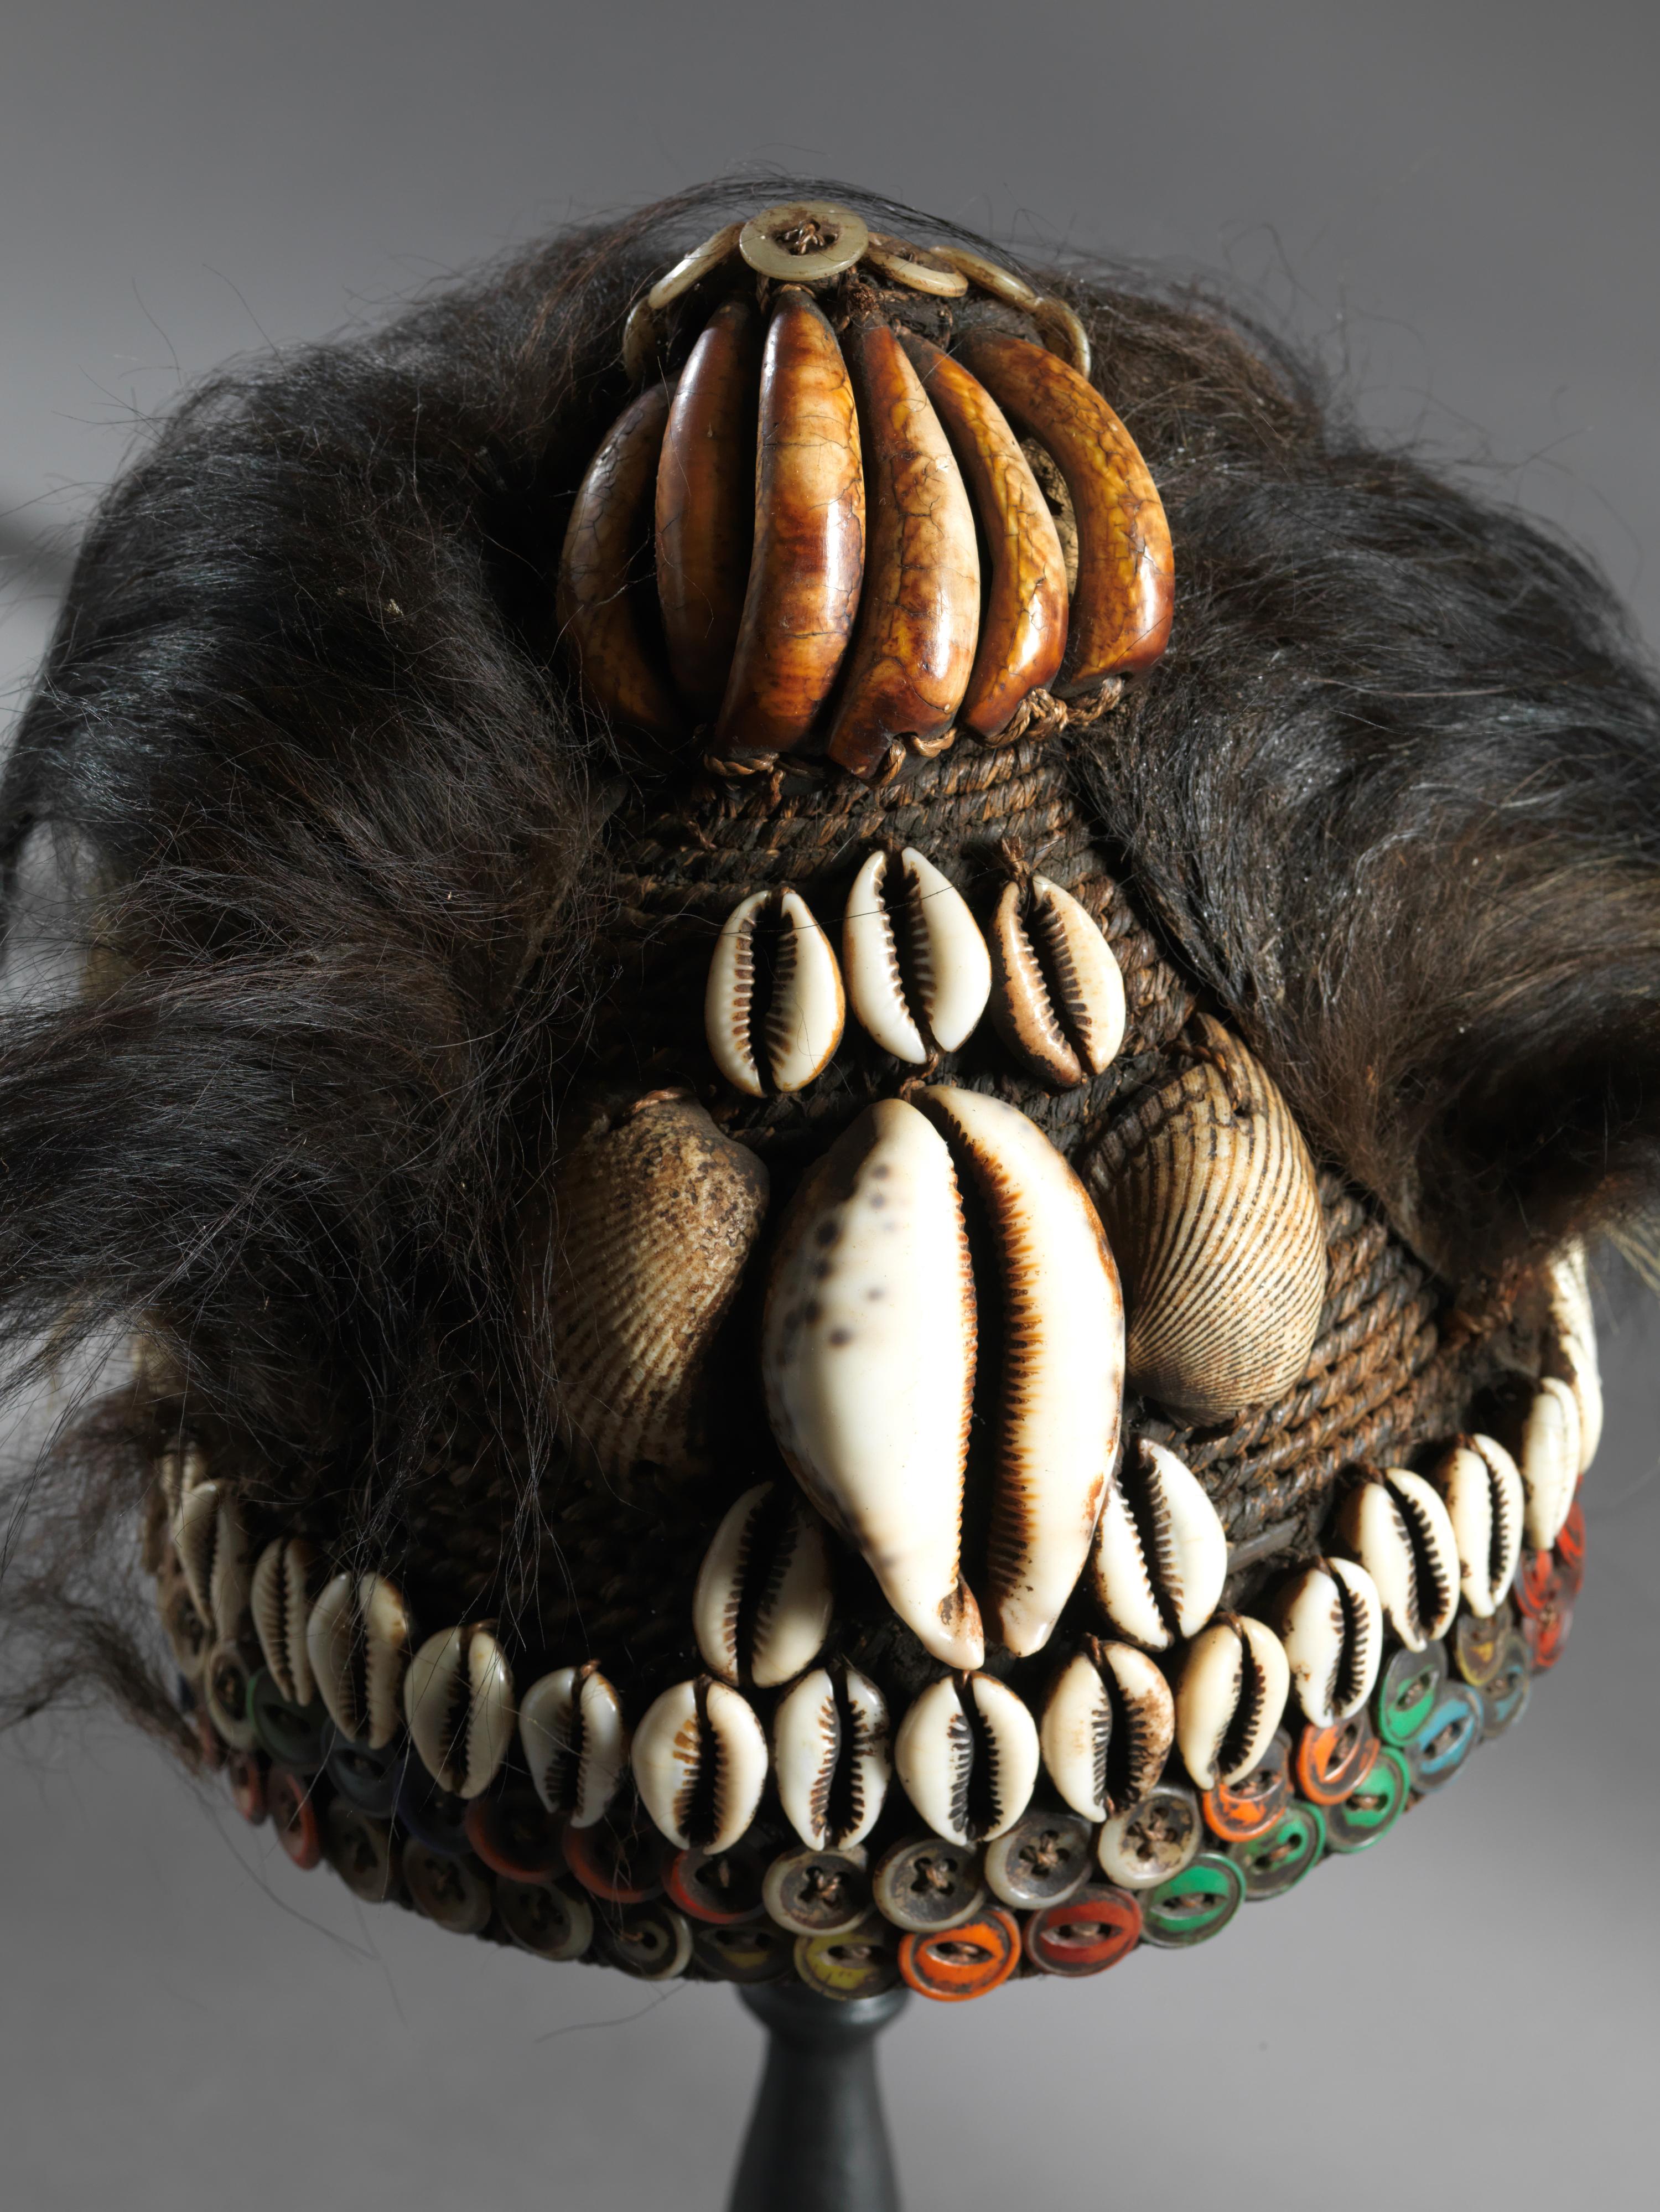 Congolese Lega People, DRC. Ceremonial Headdresses Collection